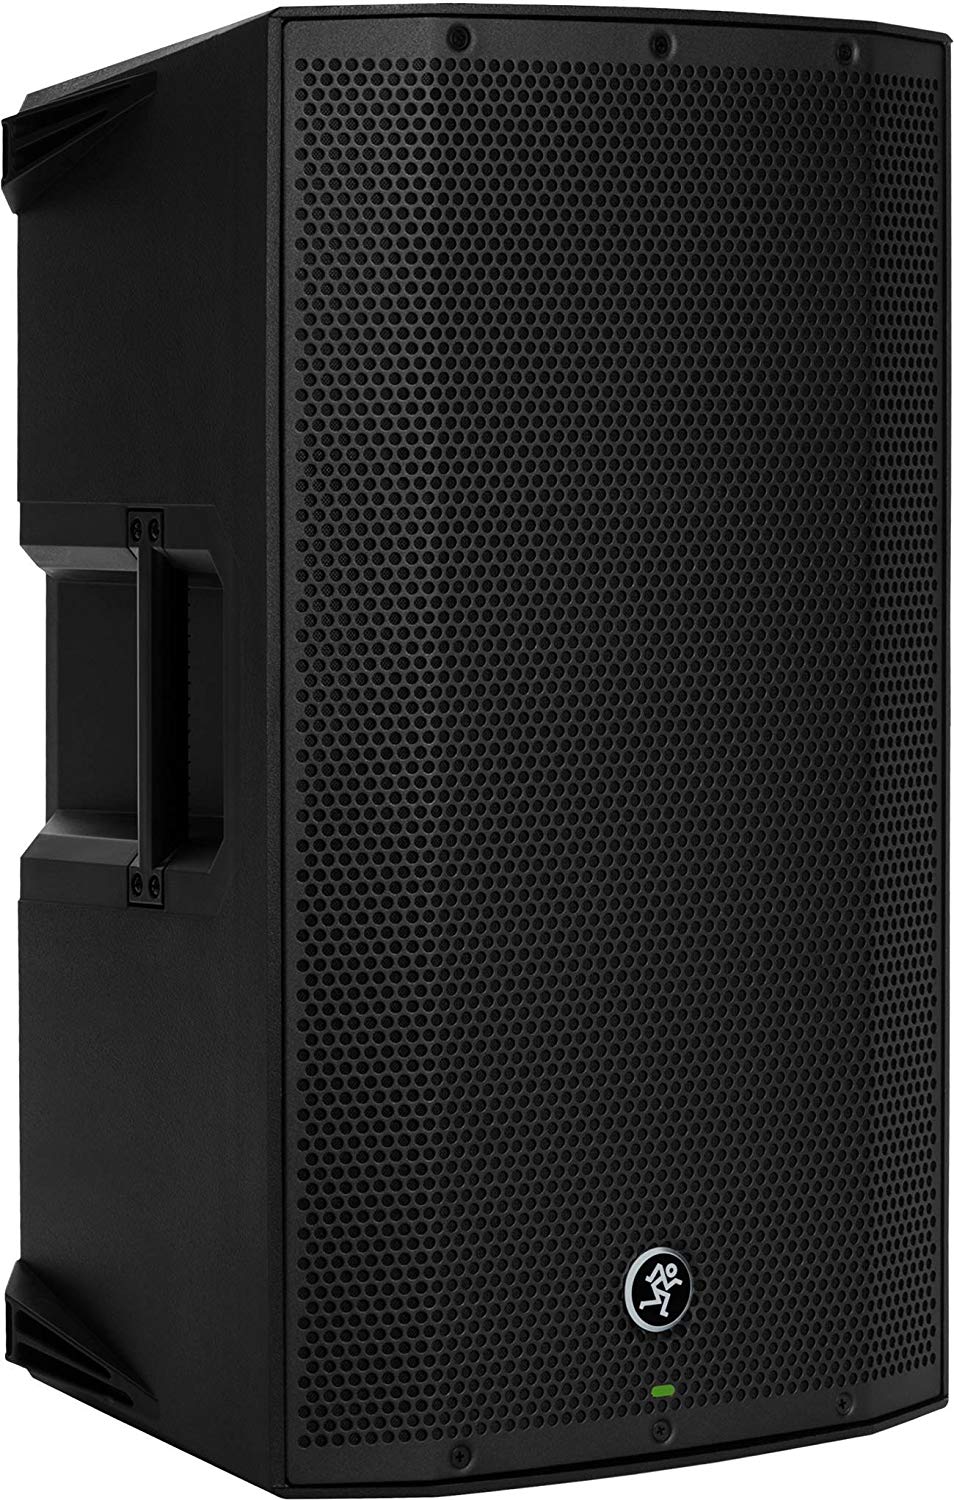 Discontinued: DISCONTINUED | Mackie Thump12BST 12" Advanced Powered PA Speaker with Bluetooth by Mackie